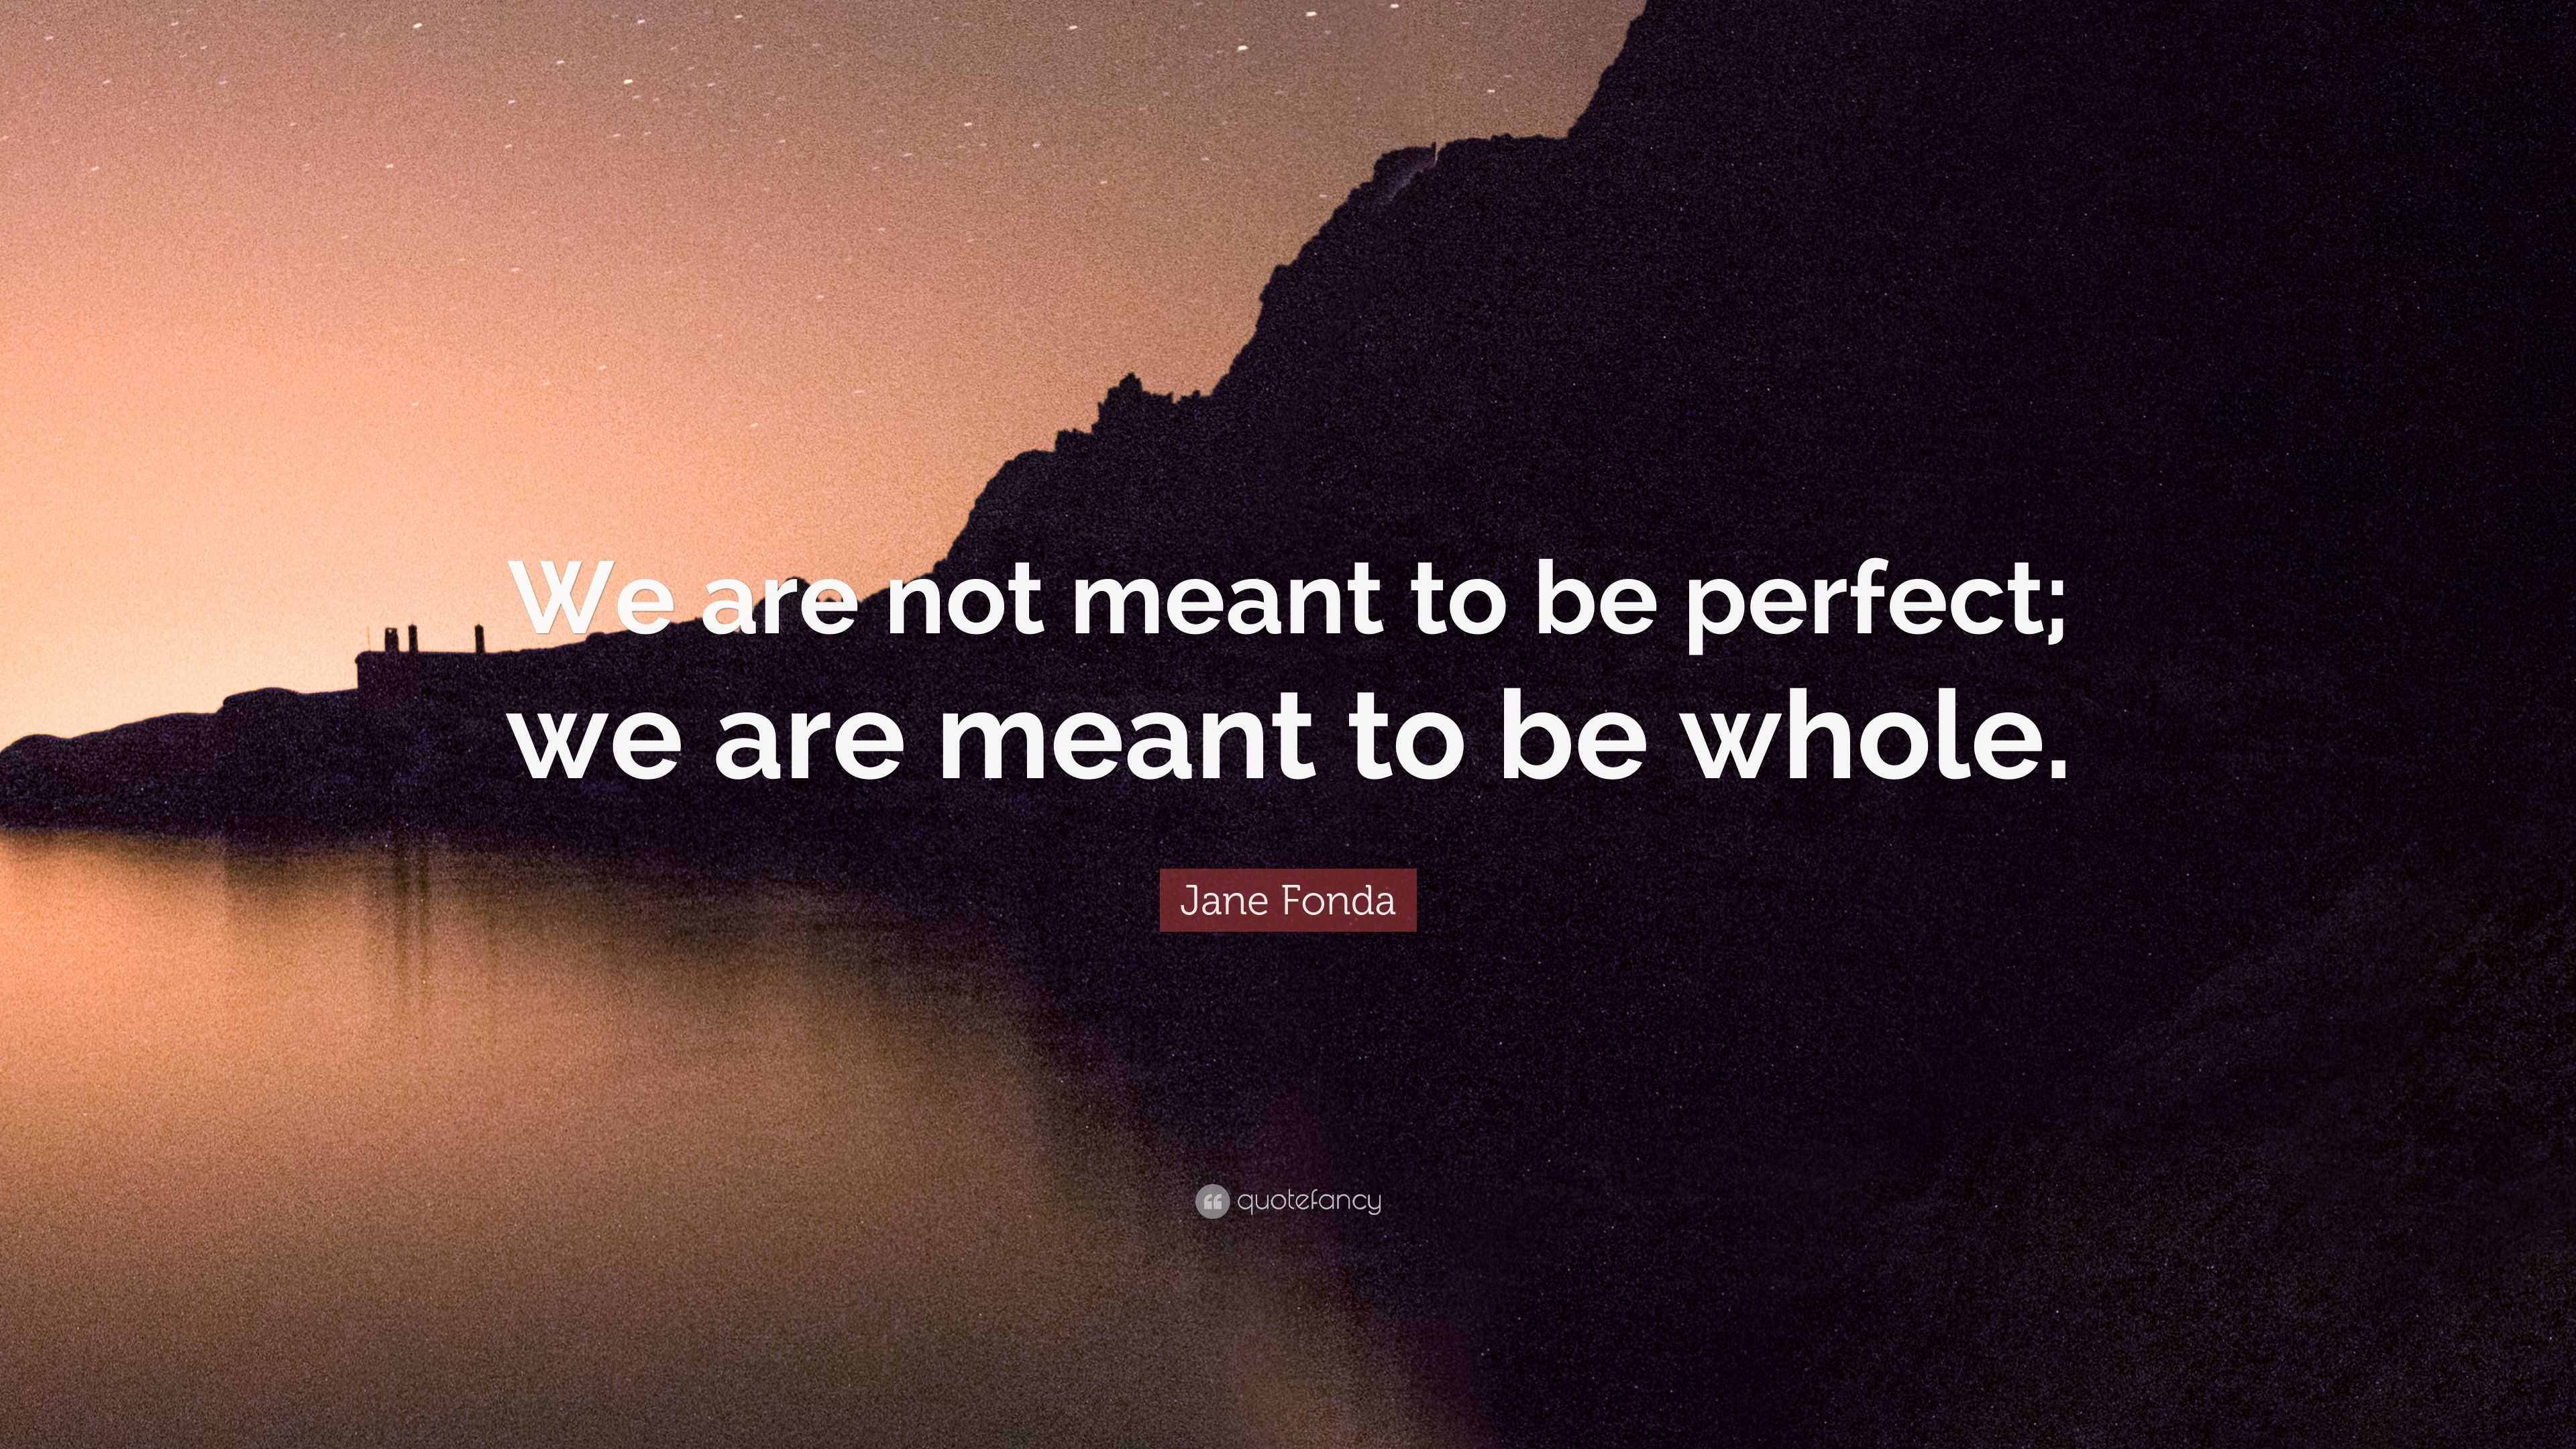 Jane Fonda Quote: “We are not meant to be perfect; we are meant to be